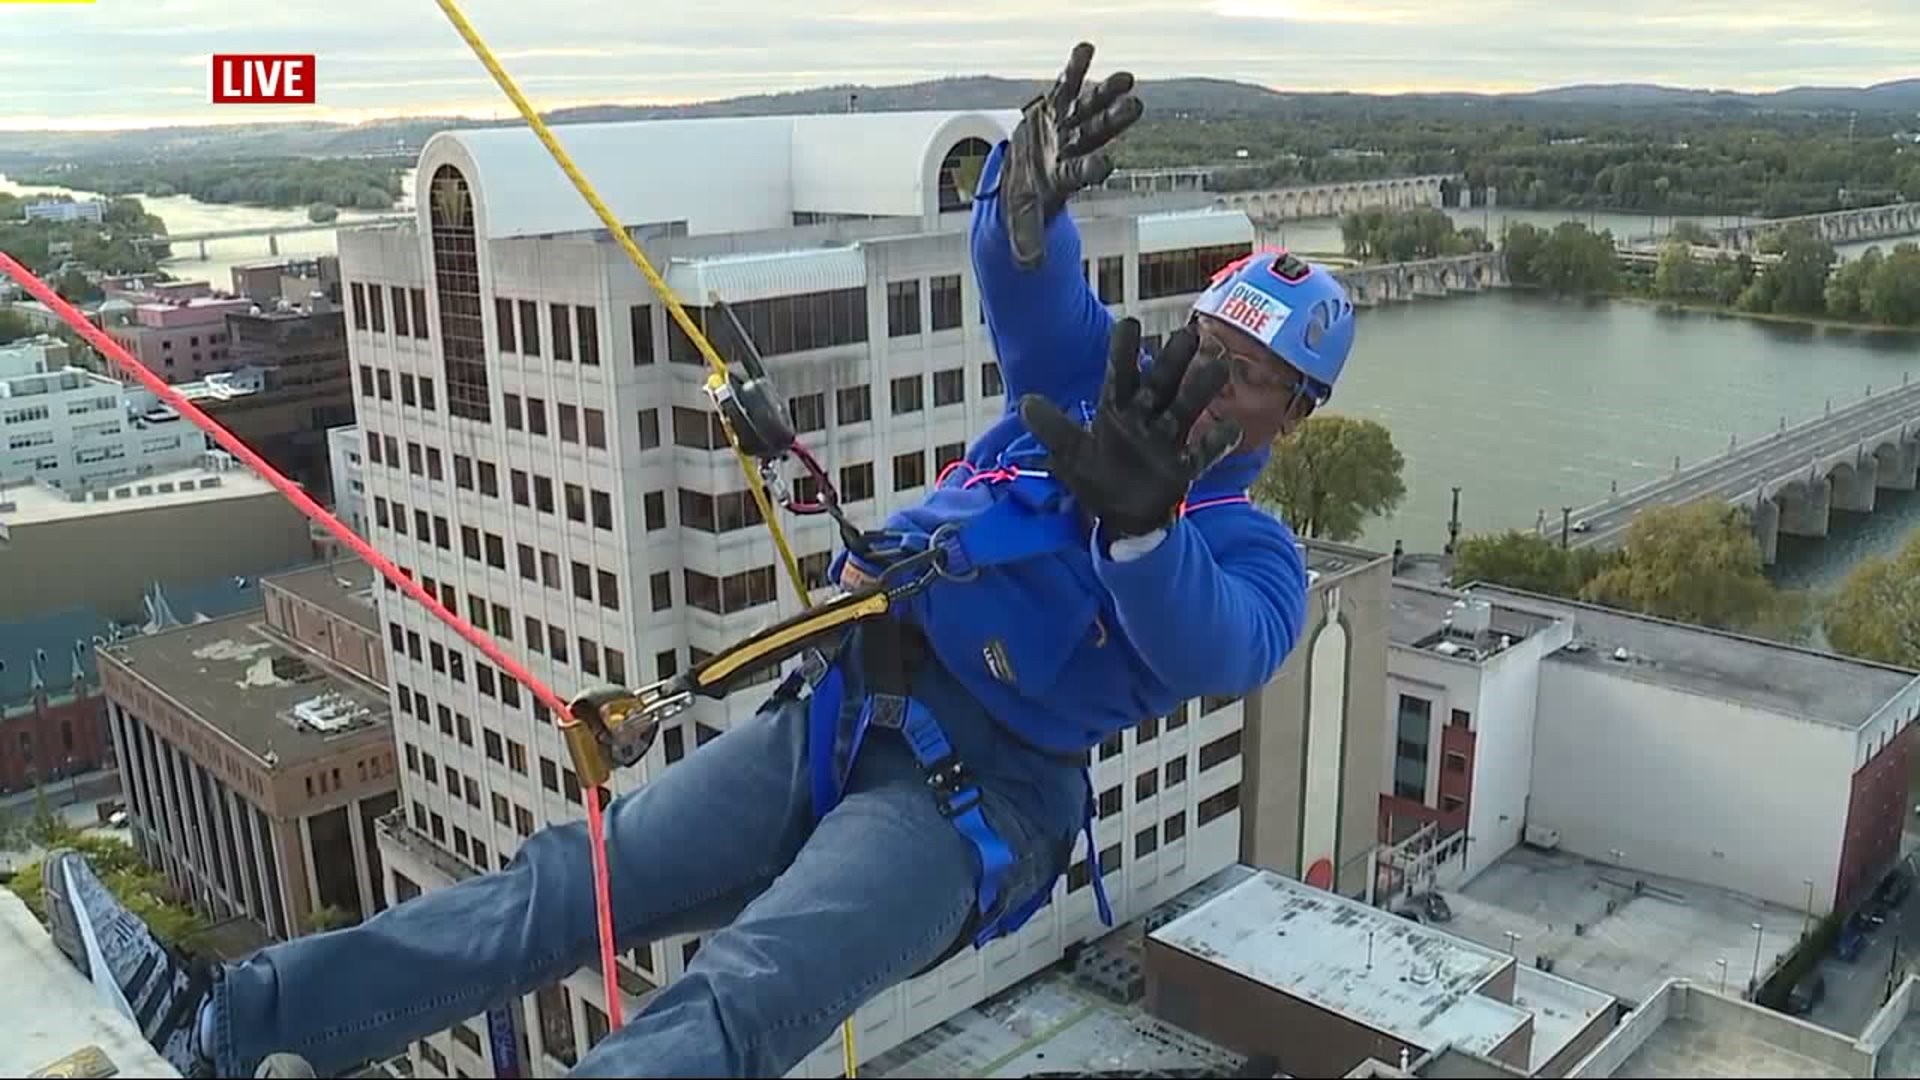 Big Brothers Big Sisters of the Capital Region "Over the Edge" 2019